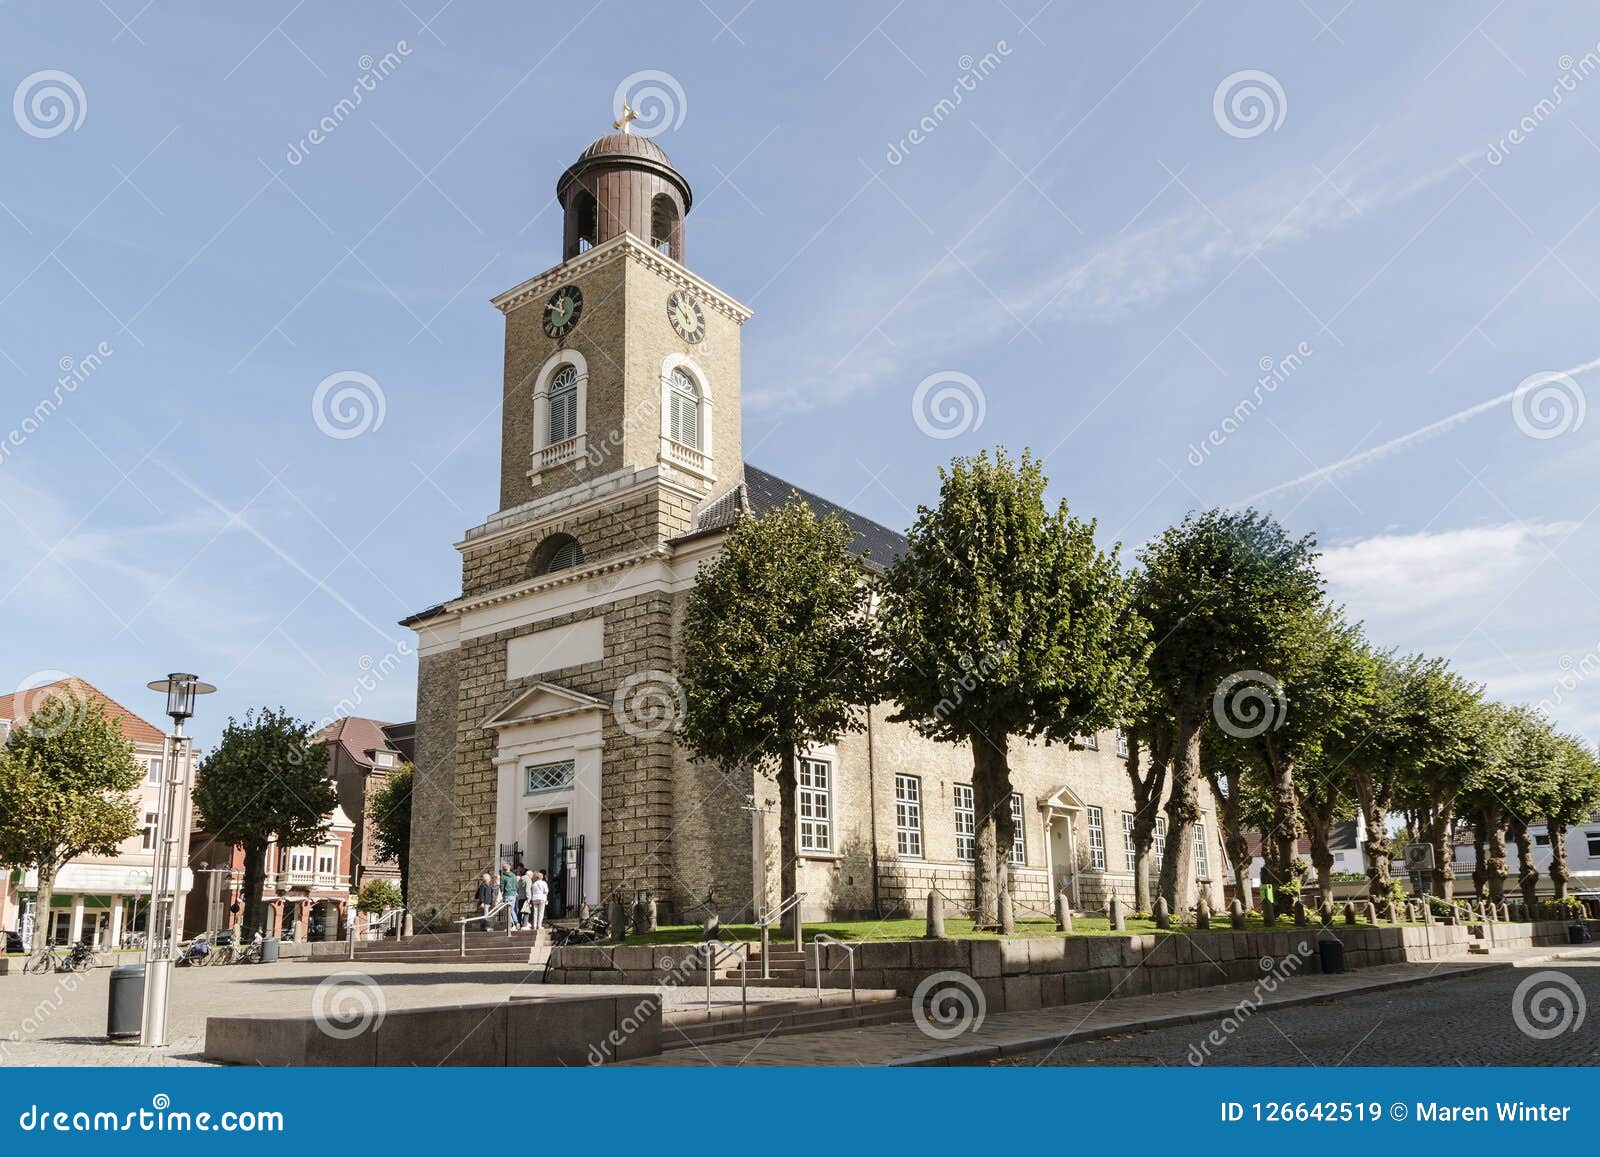 marienkirche st. mary`s church in the old town of husum, the c